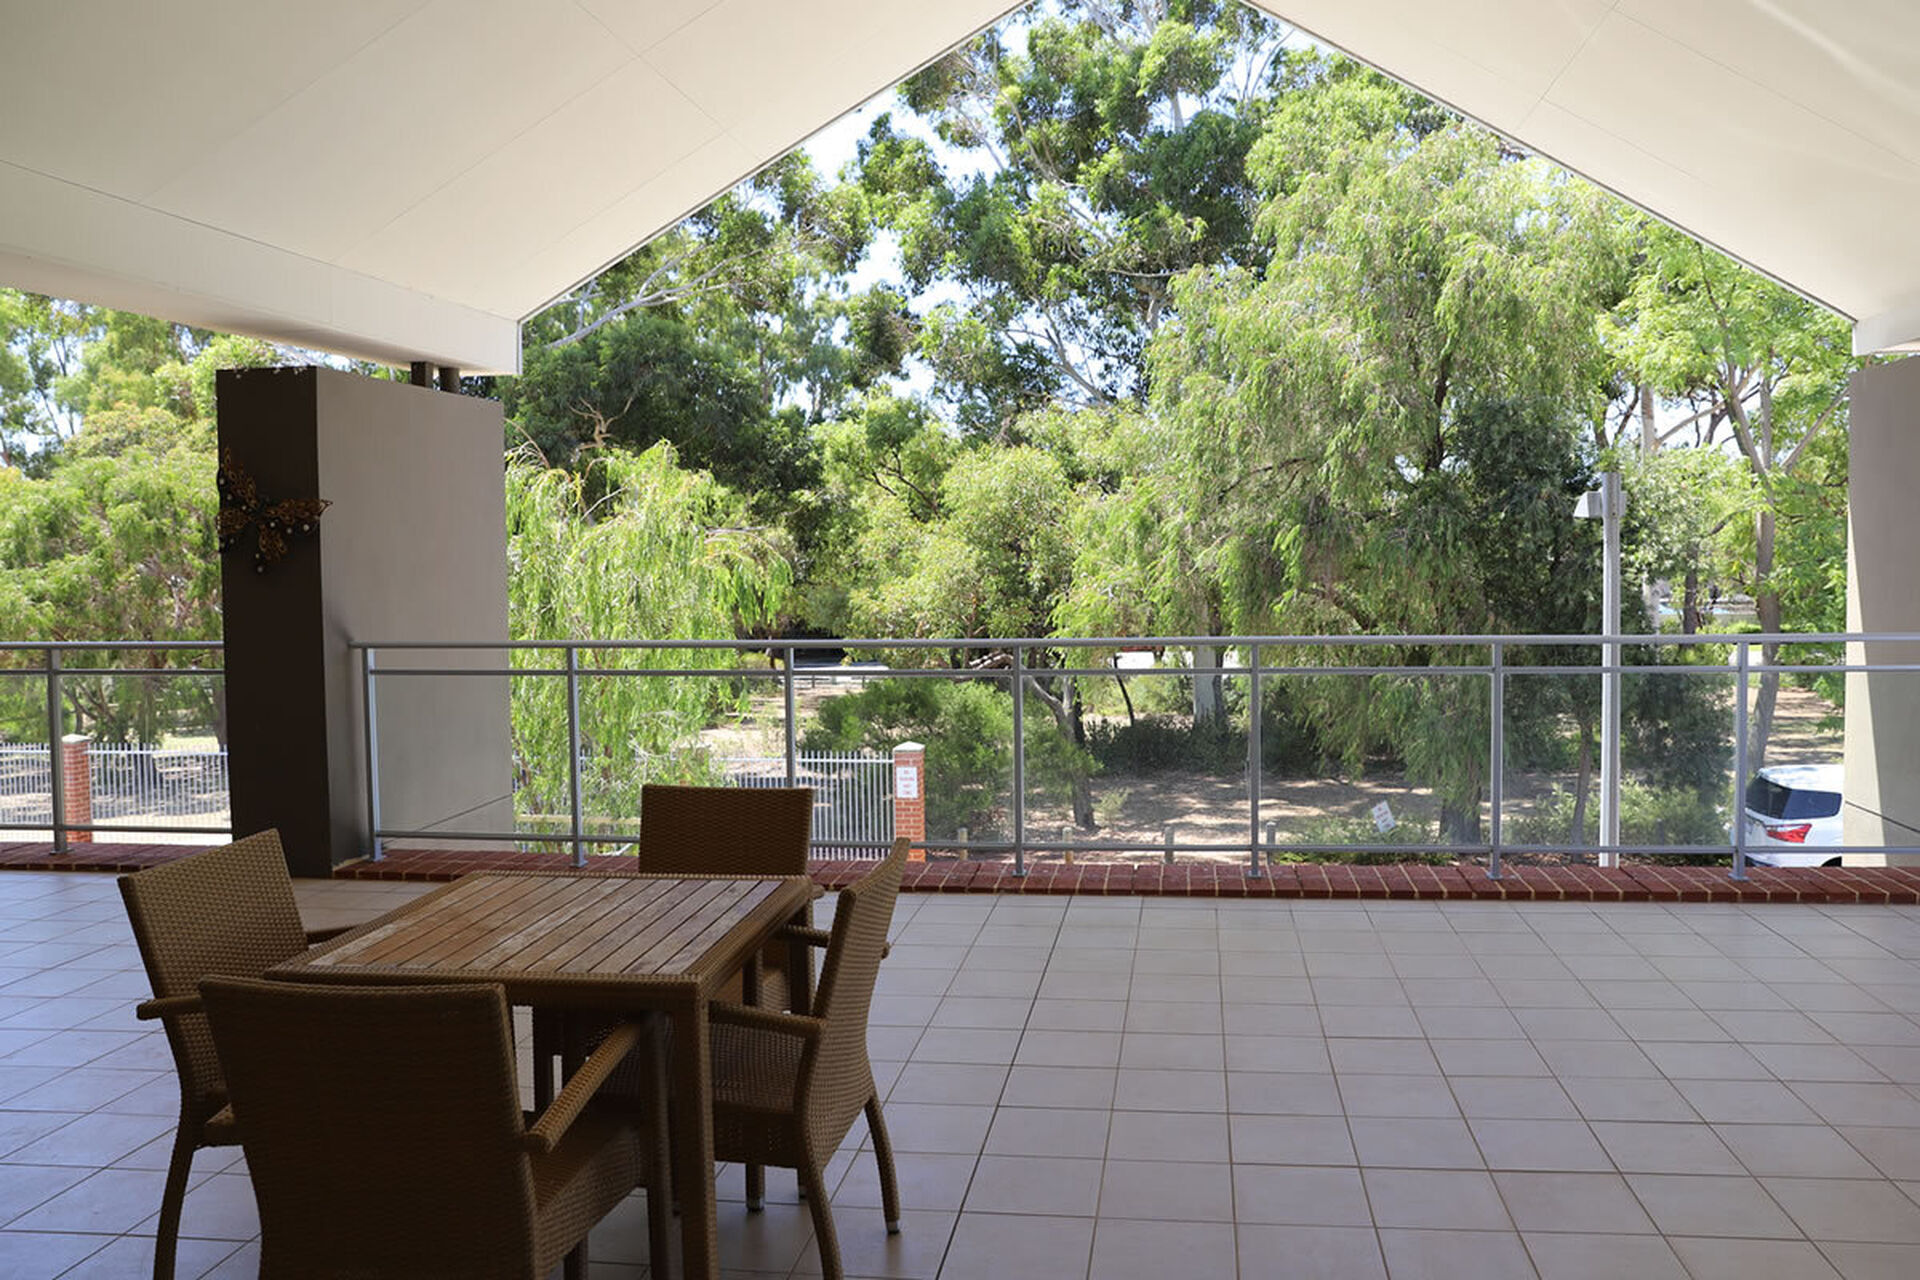 spacious sitting area for nursing home residents at baptistcare gracewood aged care home in salter point wa